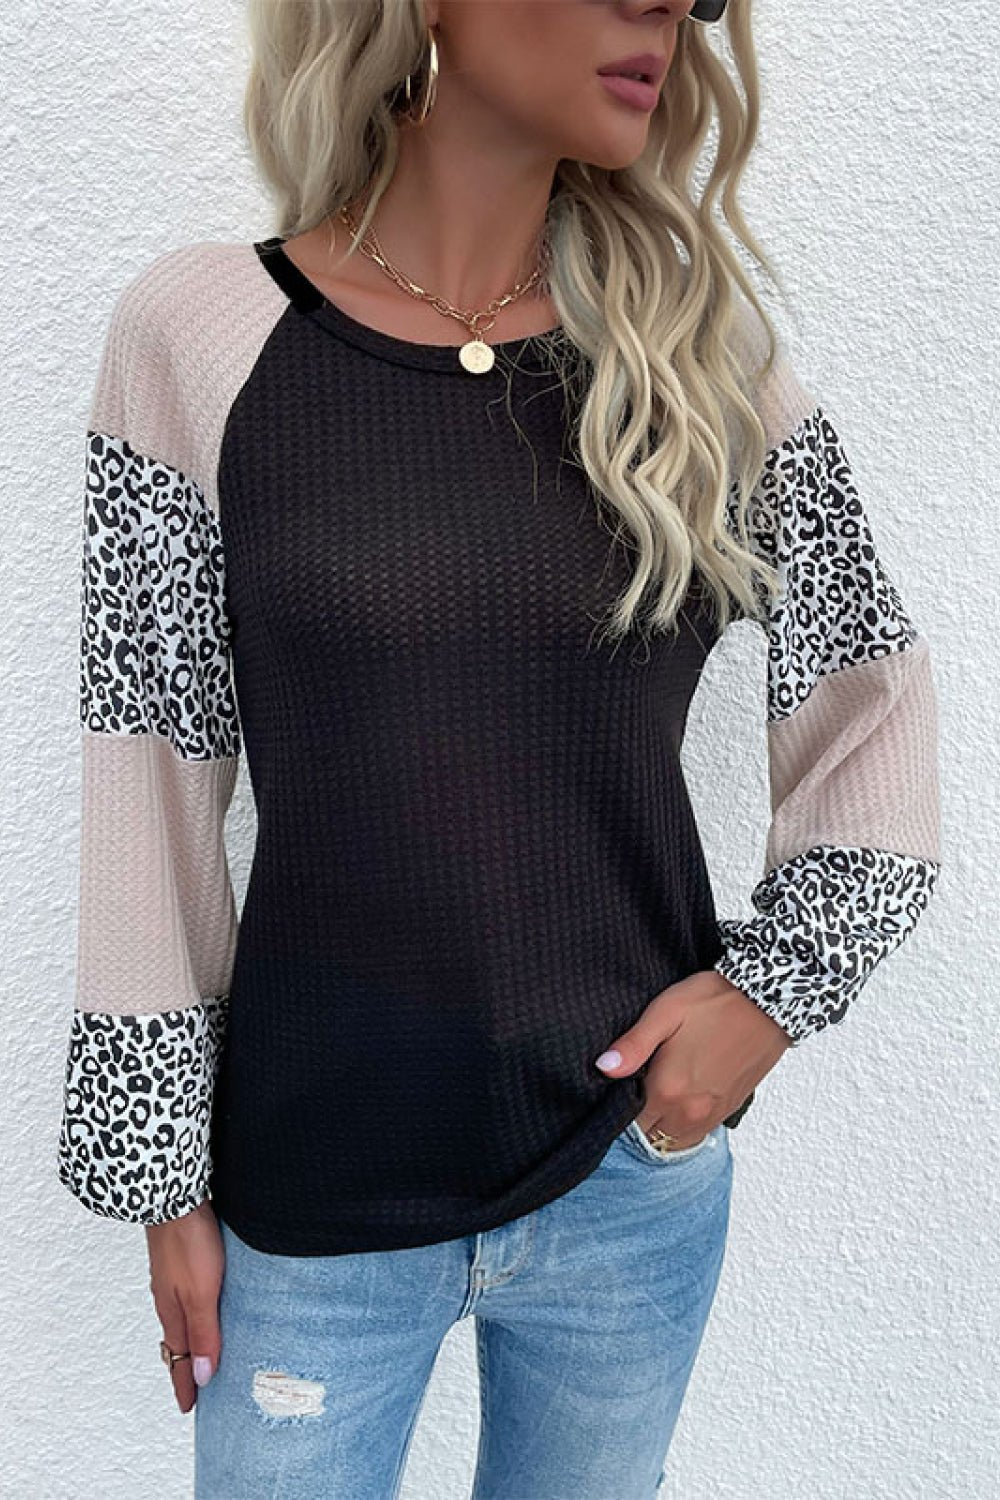 Contrast Leopard Print Waffle Knit Tee  | KIKI COUTURE-Women's Clothing, Designer Fashions, Shoes, Bags